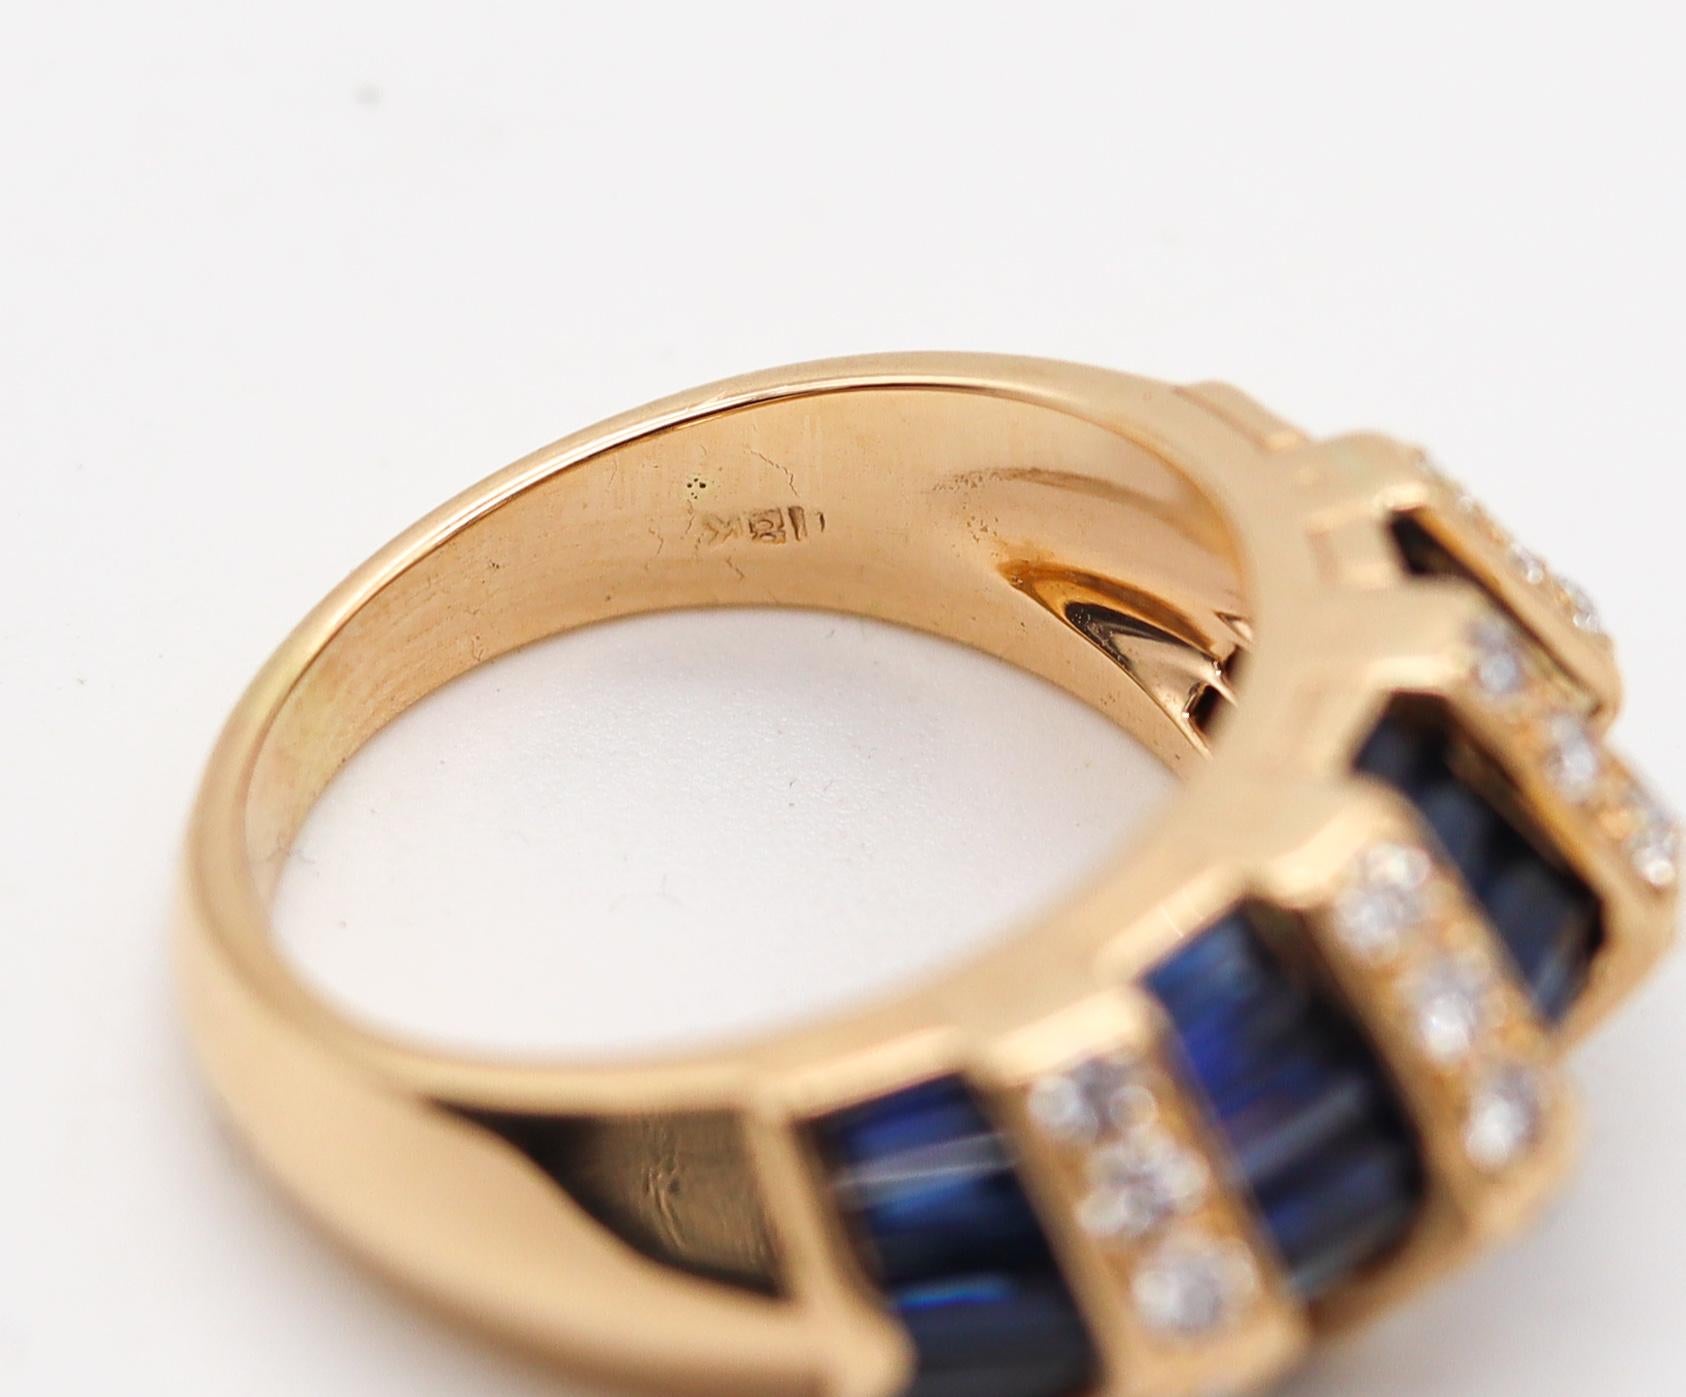 Women's Oscar Heyman Ring in 18kt Yellow Gold with 3.57ctw in Sapphires and Diamonds